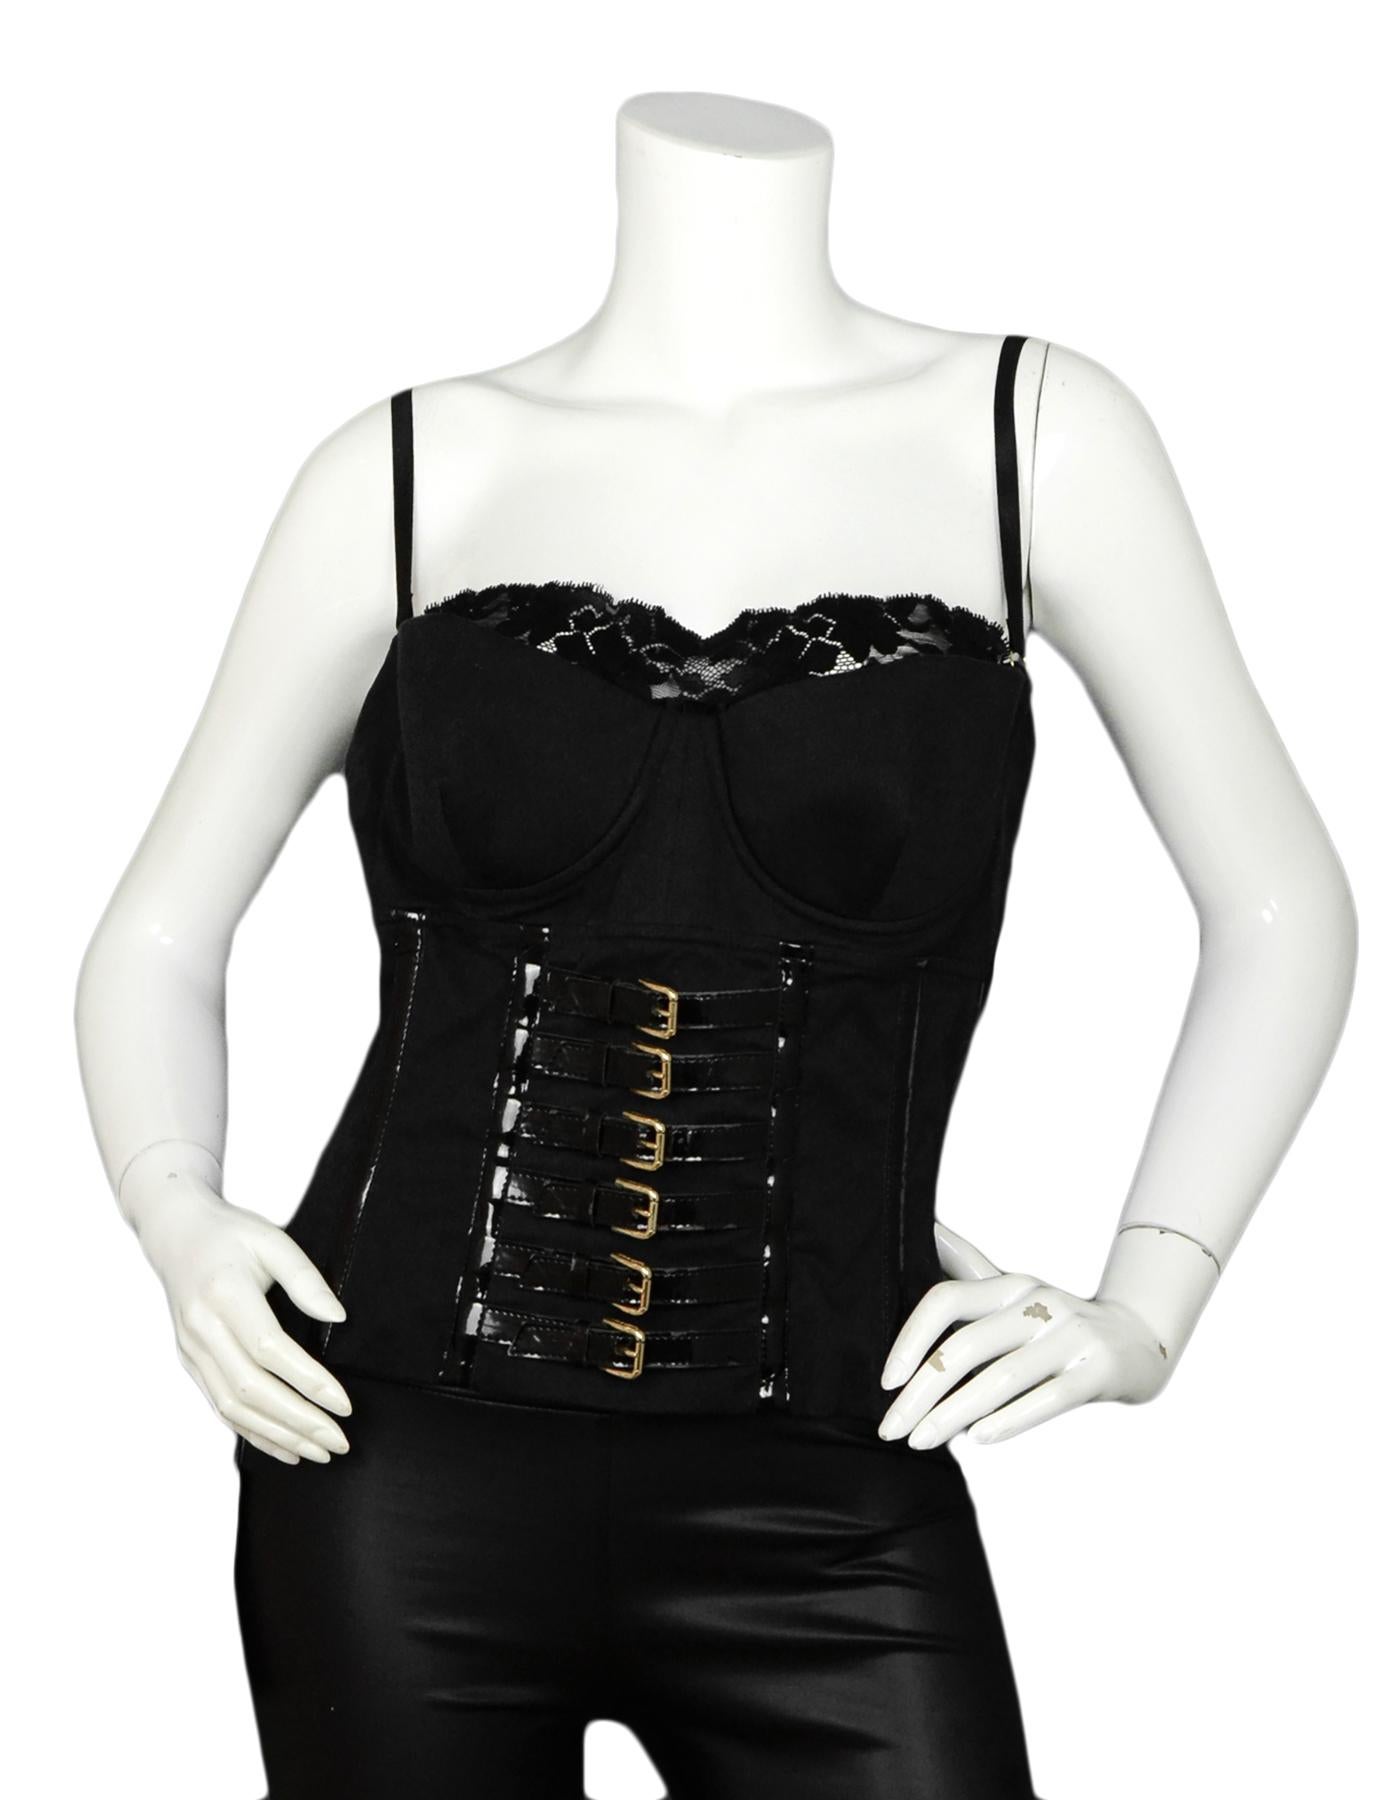 Dolce & Gabbana Black Cotton Blend Bustier w/ Gold Buckles sz IT46

Made In: Italy 
Color: Black
Materials: 83% Cotton, 2% Elastane, 3% Polyester, 12% Polyurethane
Lining: 84% Cupro, 16% Elastane
Opening/Closure: Back zip
Overall Condition: